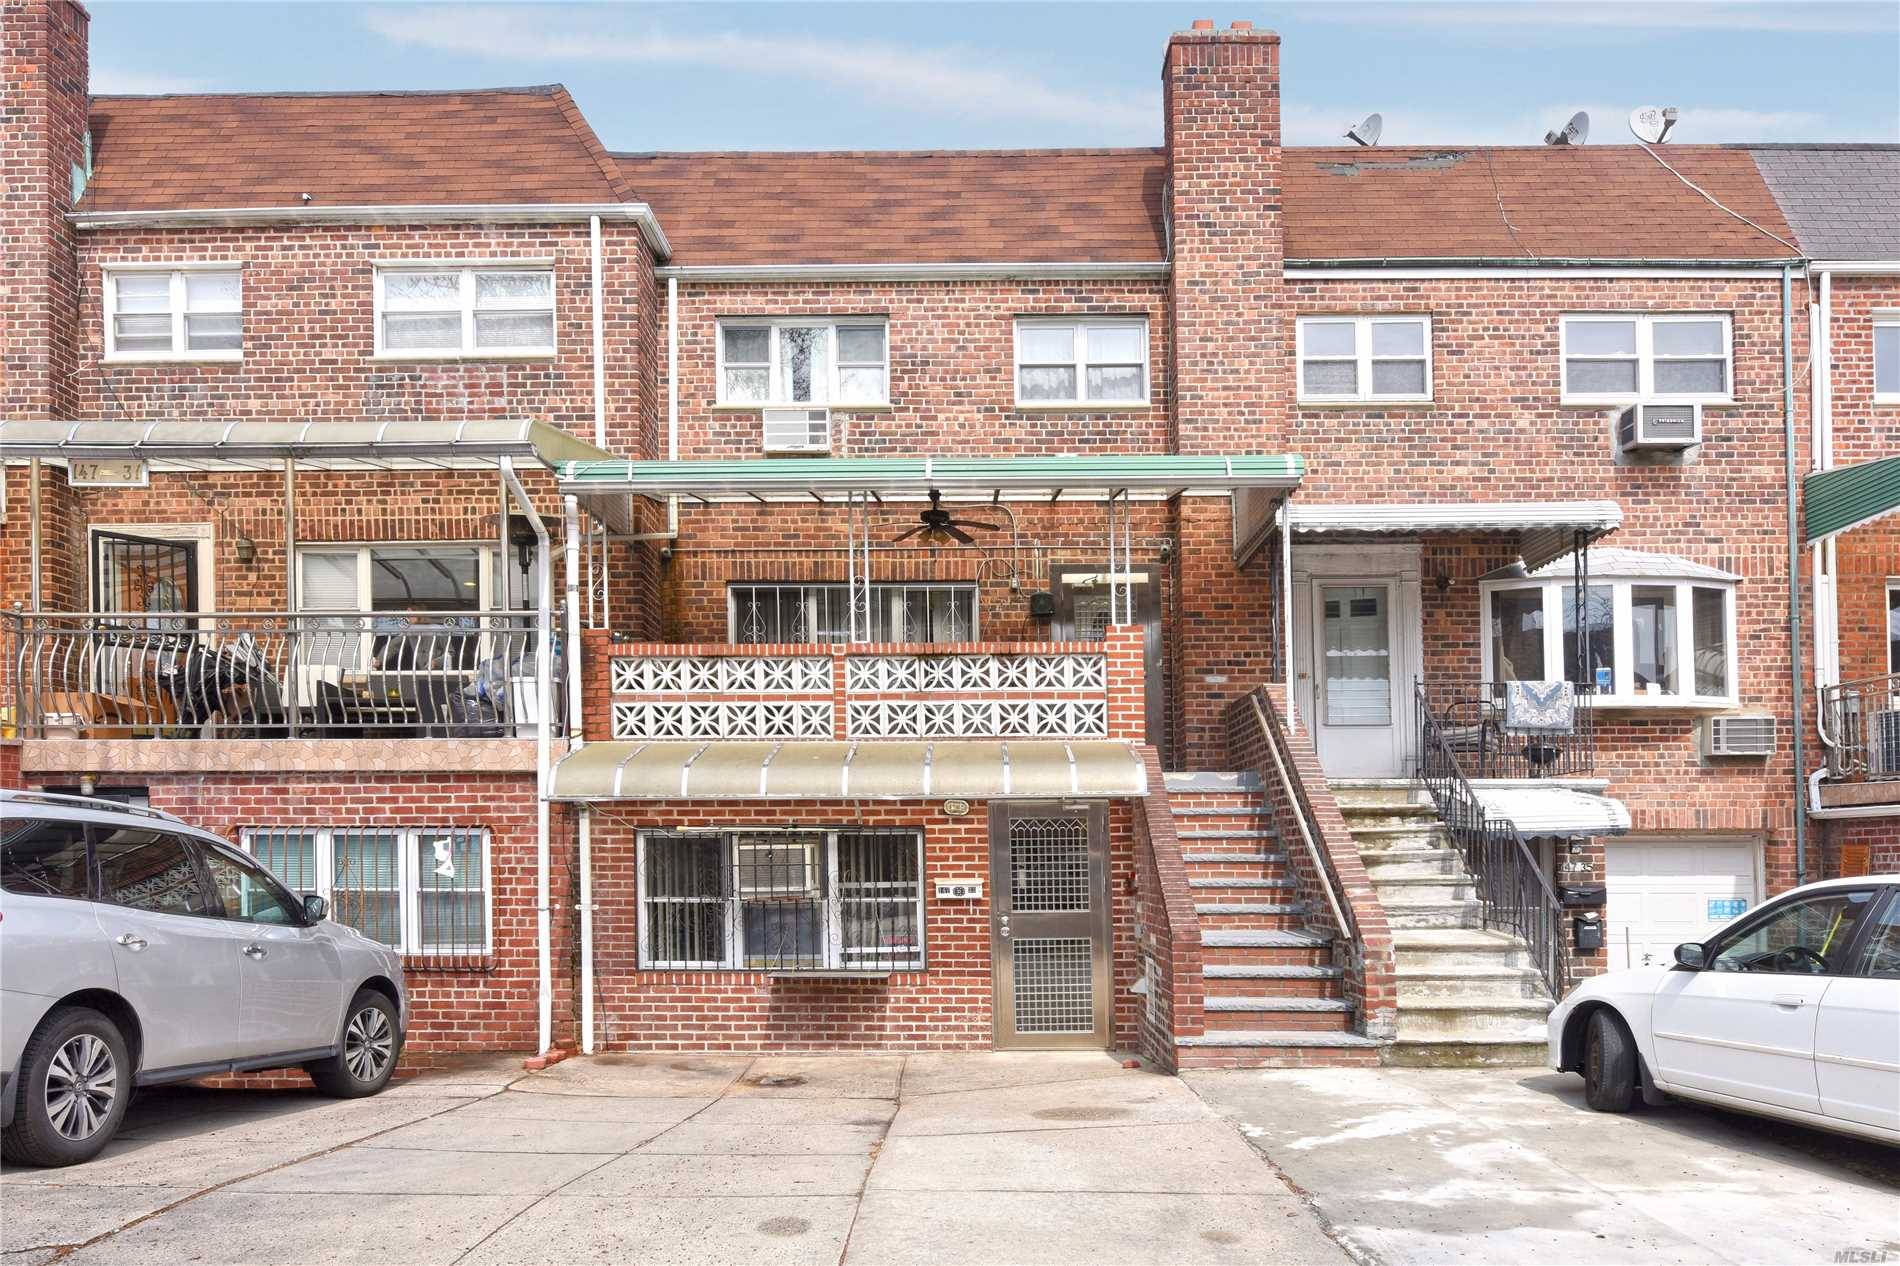 Well Maintained 2 Family House Located In Prime Location Of Kew Garden Hills.